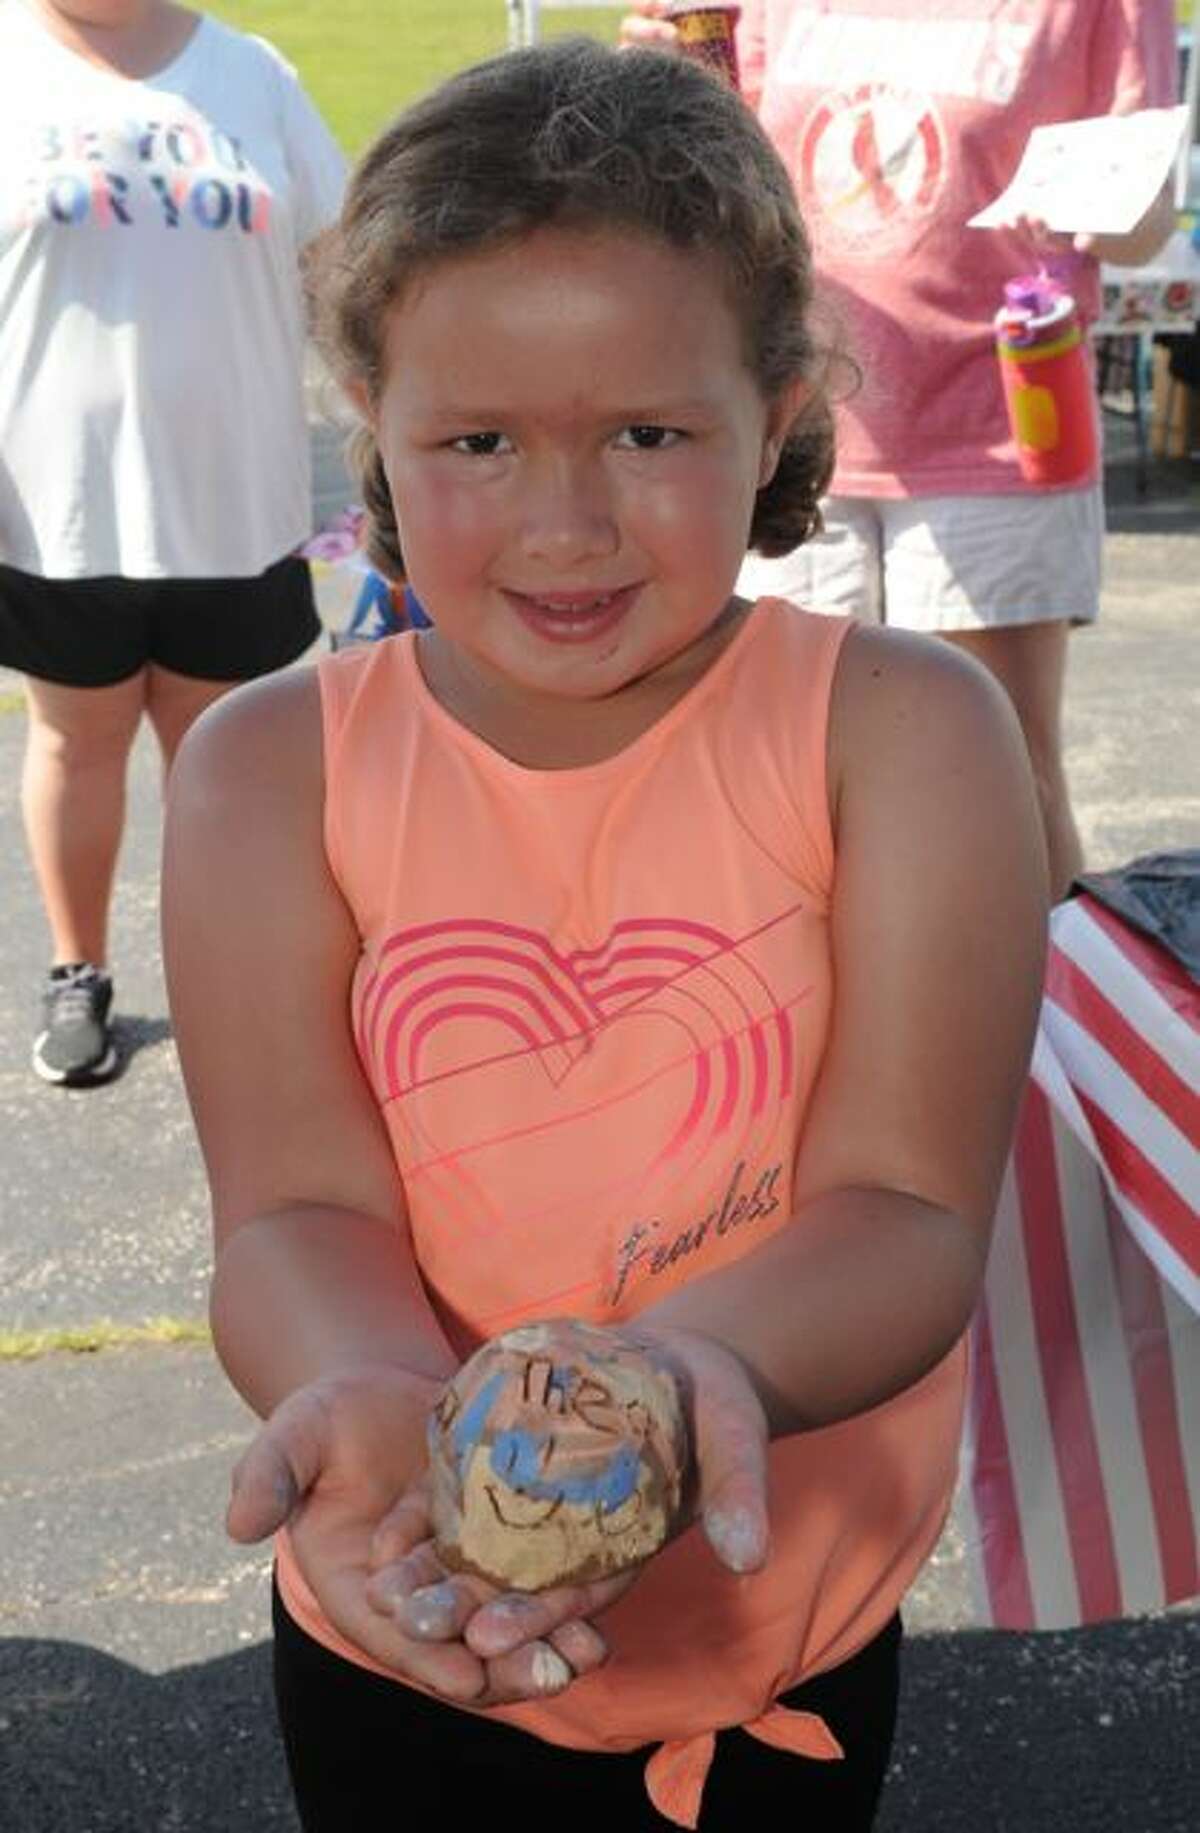 Eight-year-old Ella Reno of Granite City proudly displays a ceramic bell she made on Saturday during Art Play Day during the Alton Farmers and Artisans Market.